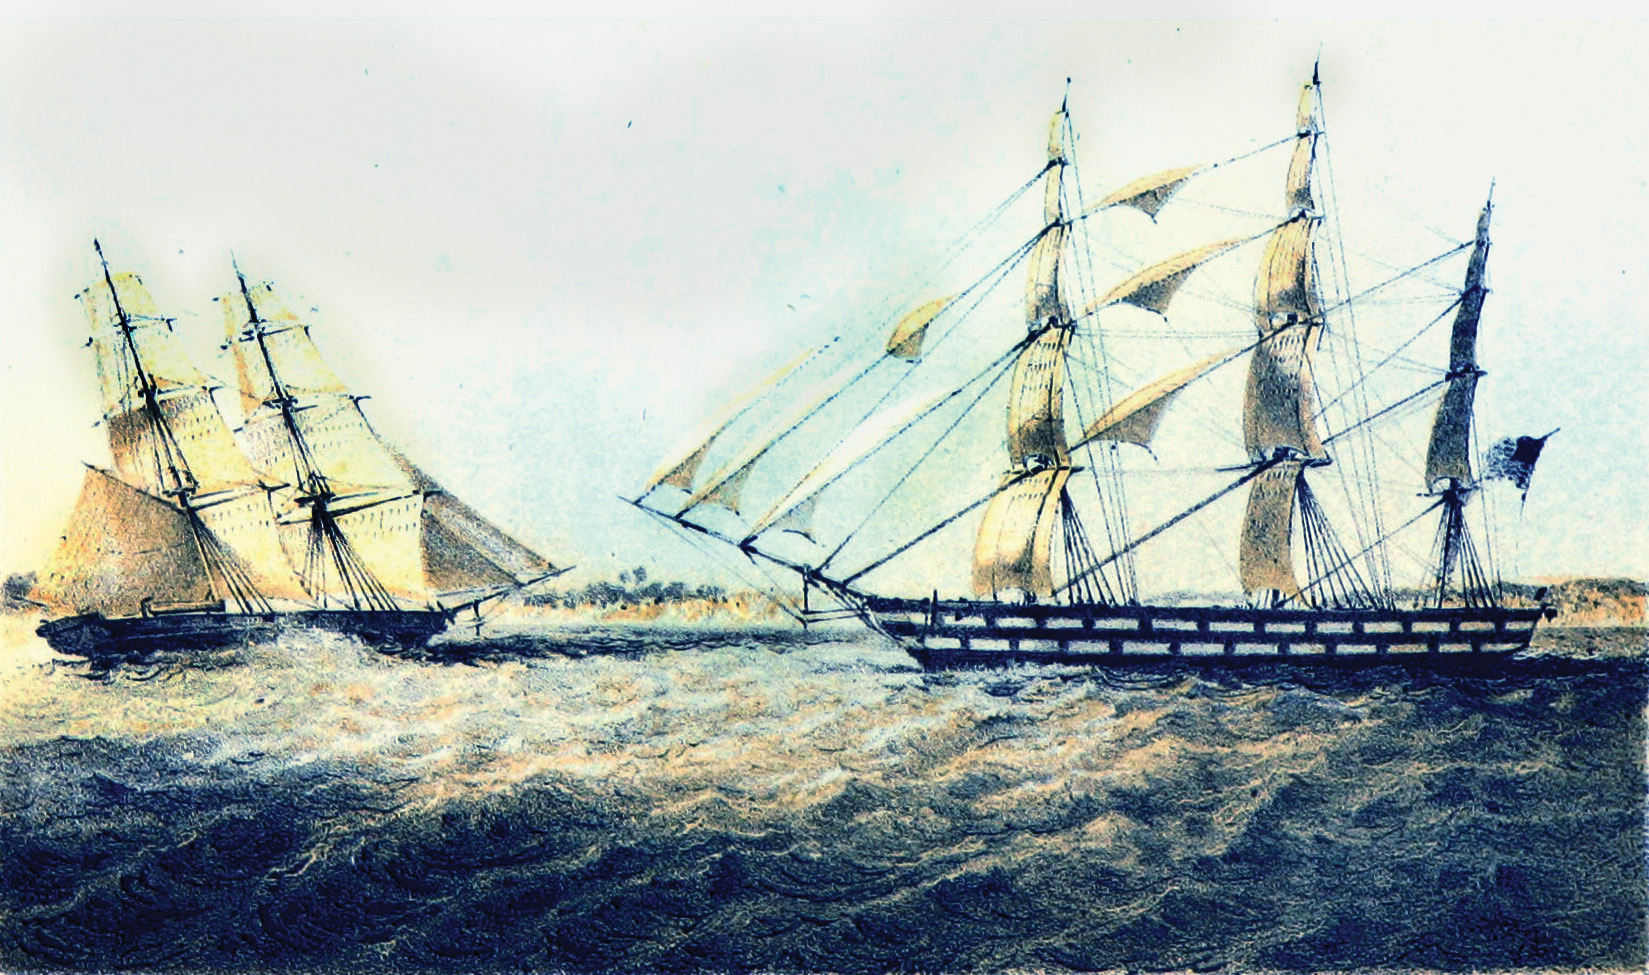 The sail-powered brig USS Perry (right) of the Africa Squadron seizes the slave ship Martha. By the 1850s, half of the ships in the squadron were modern steam-powered vessels.